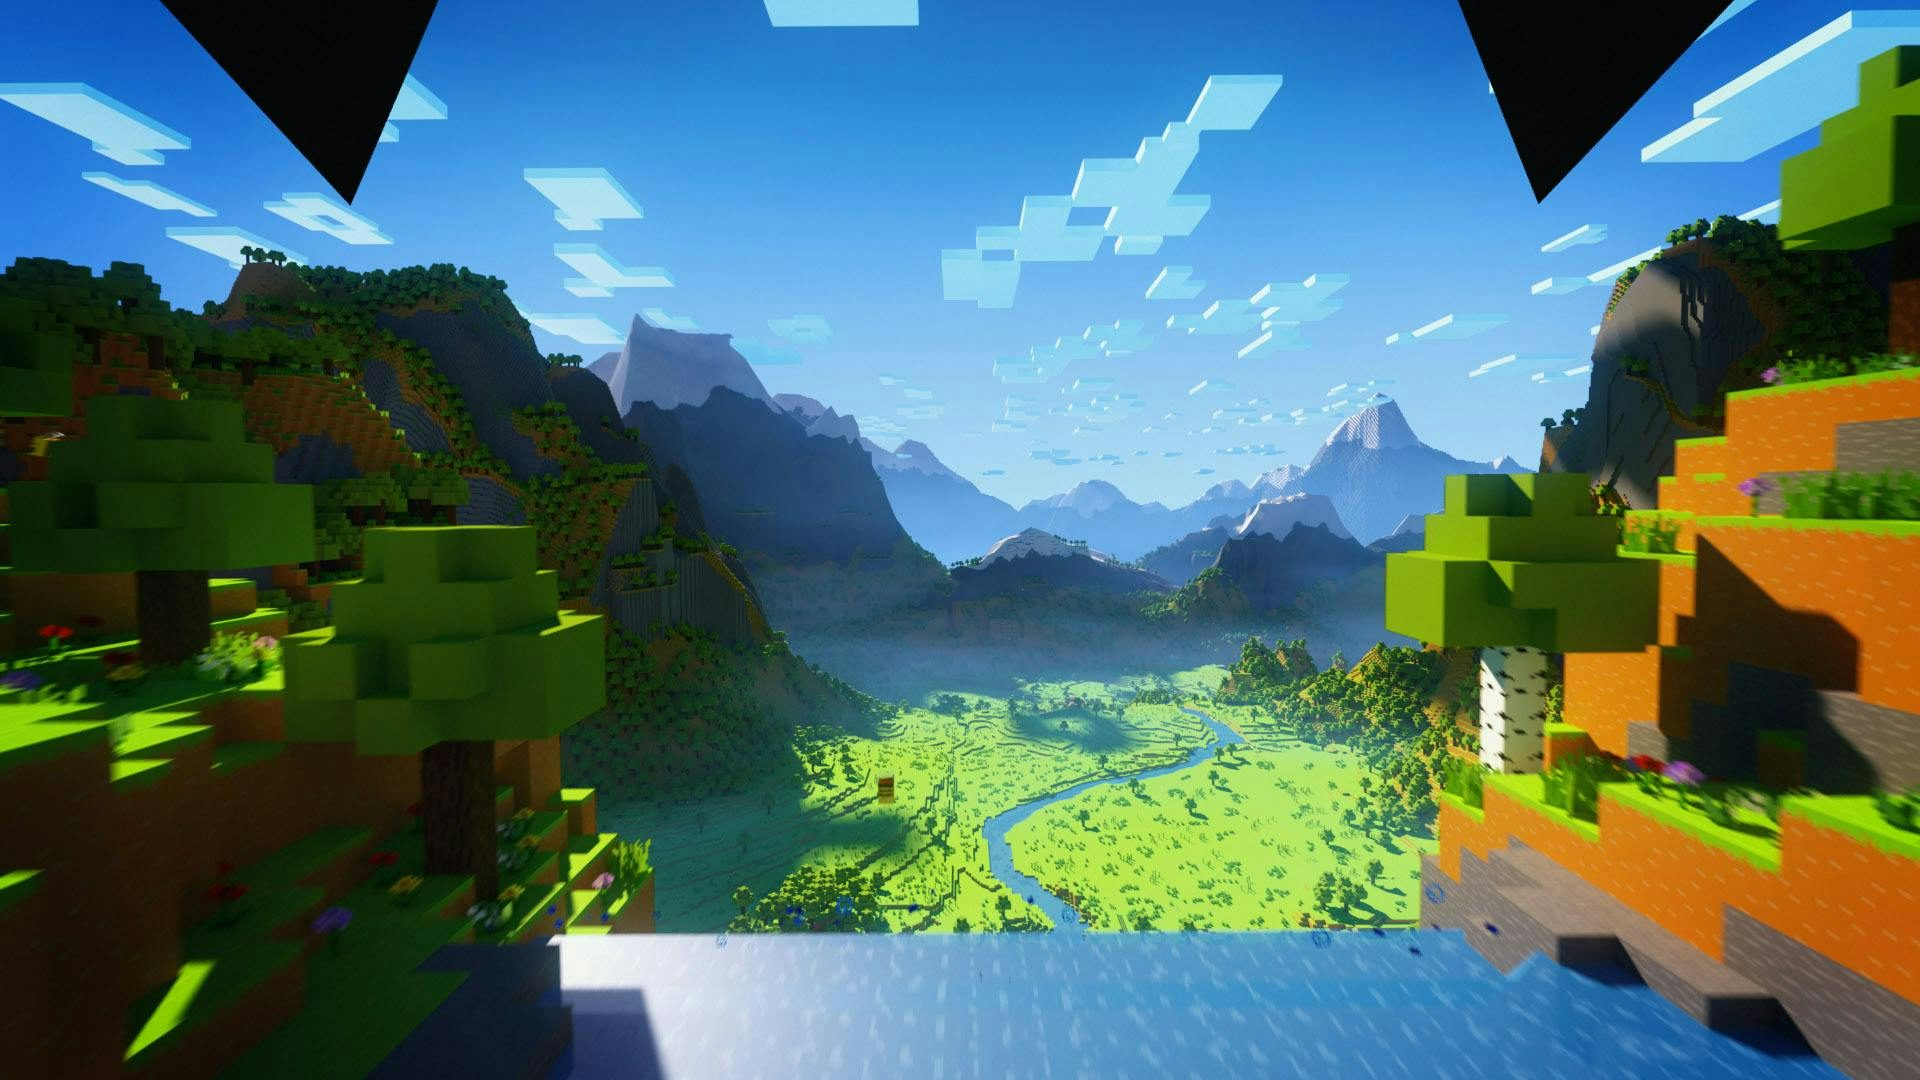 POV or point of view from a minecraft bee overseeing a green landscape with surrounding mountains